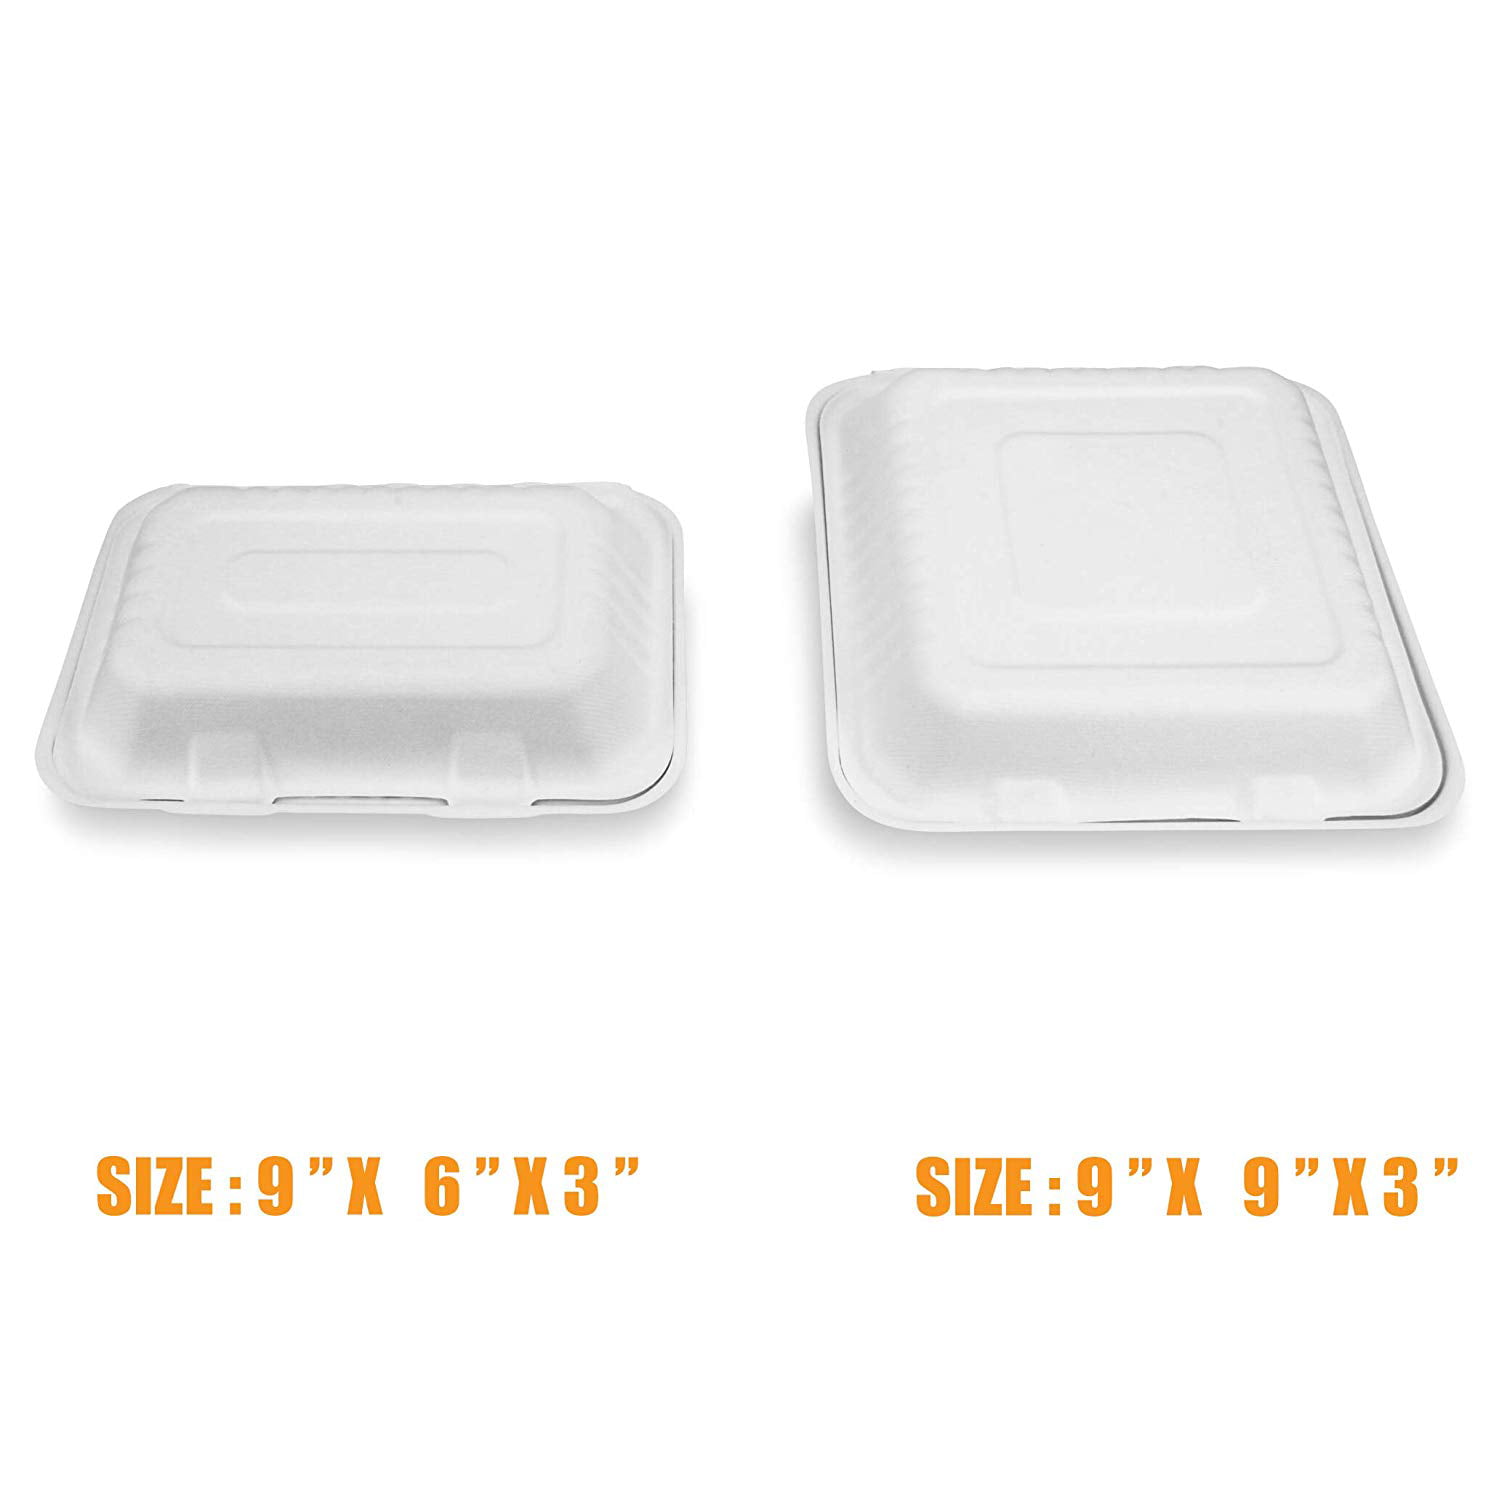 Styrofoam Clamshell Takeout Container - 150 Pack (260193)